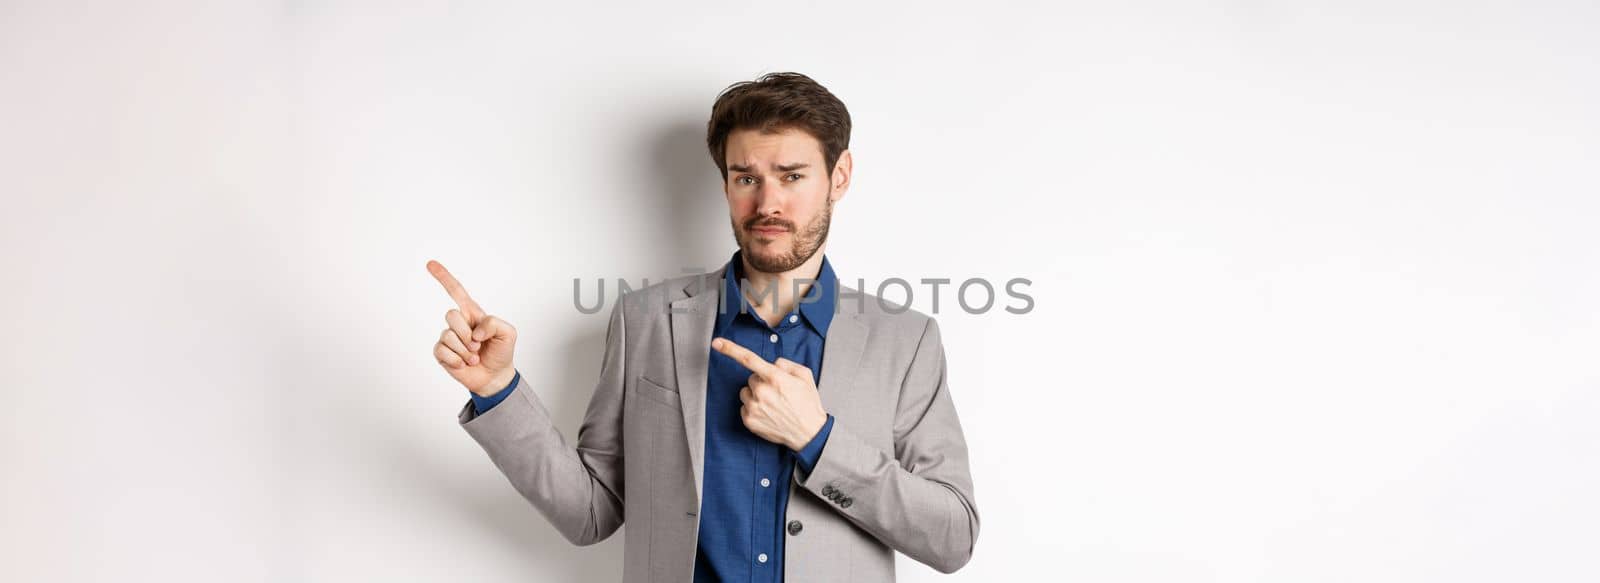 Showing bad example. Skeptical businessman look displeased and frowning while pointing at upper right corner banner, standing against white background.